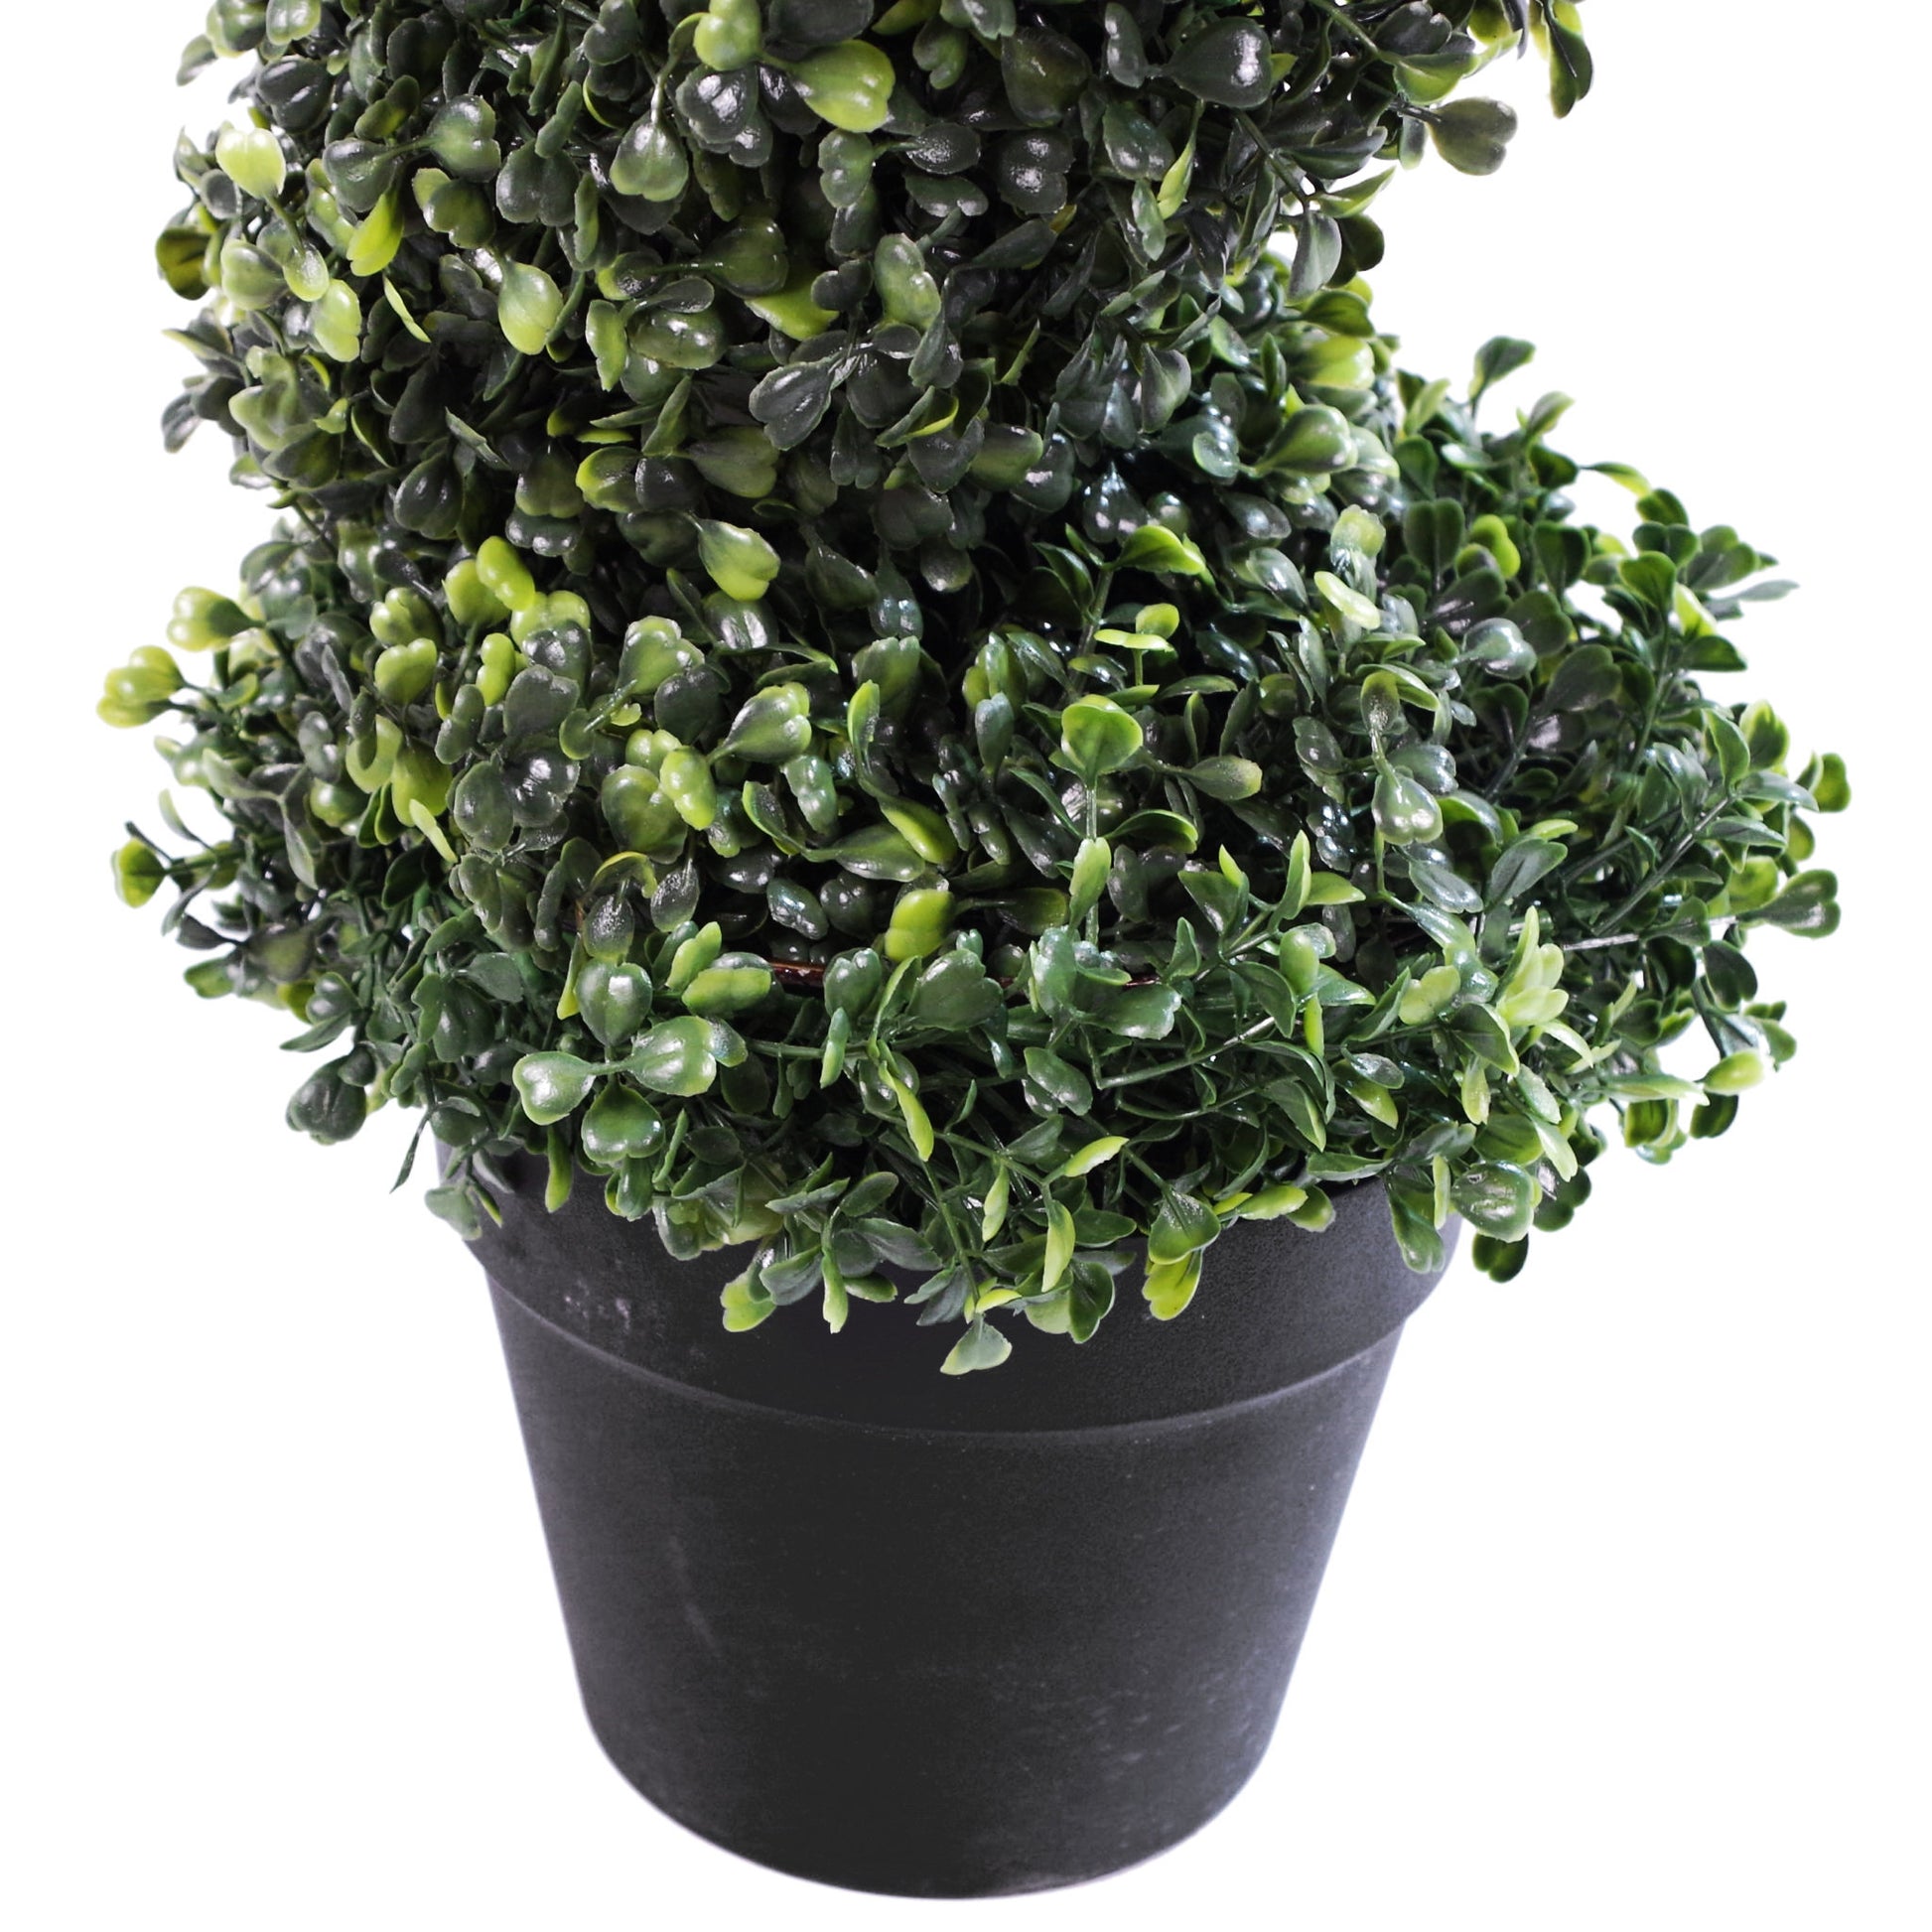 Artificial Topiary Spiral Boxwood Tree 120cm